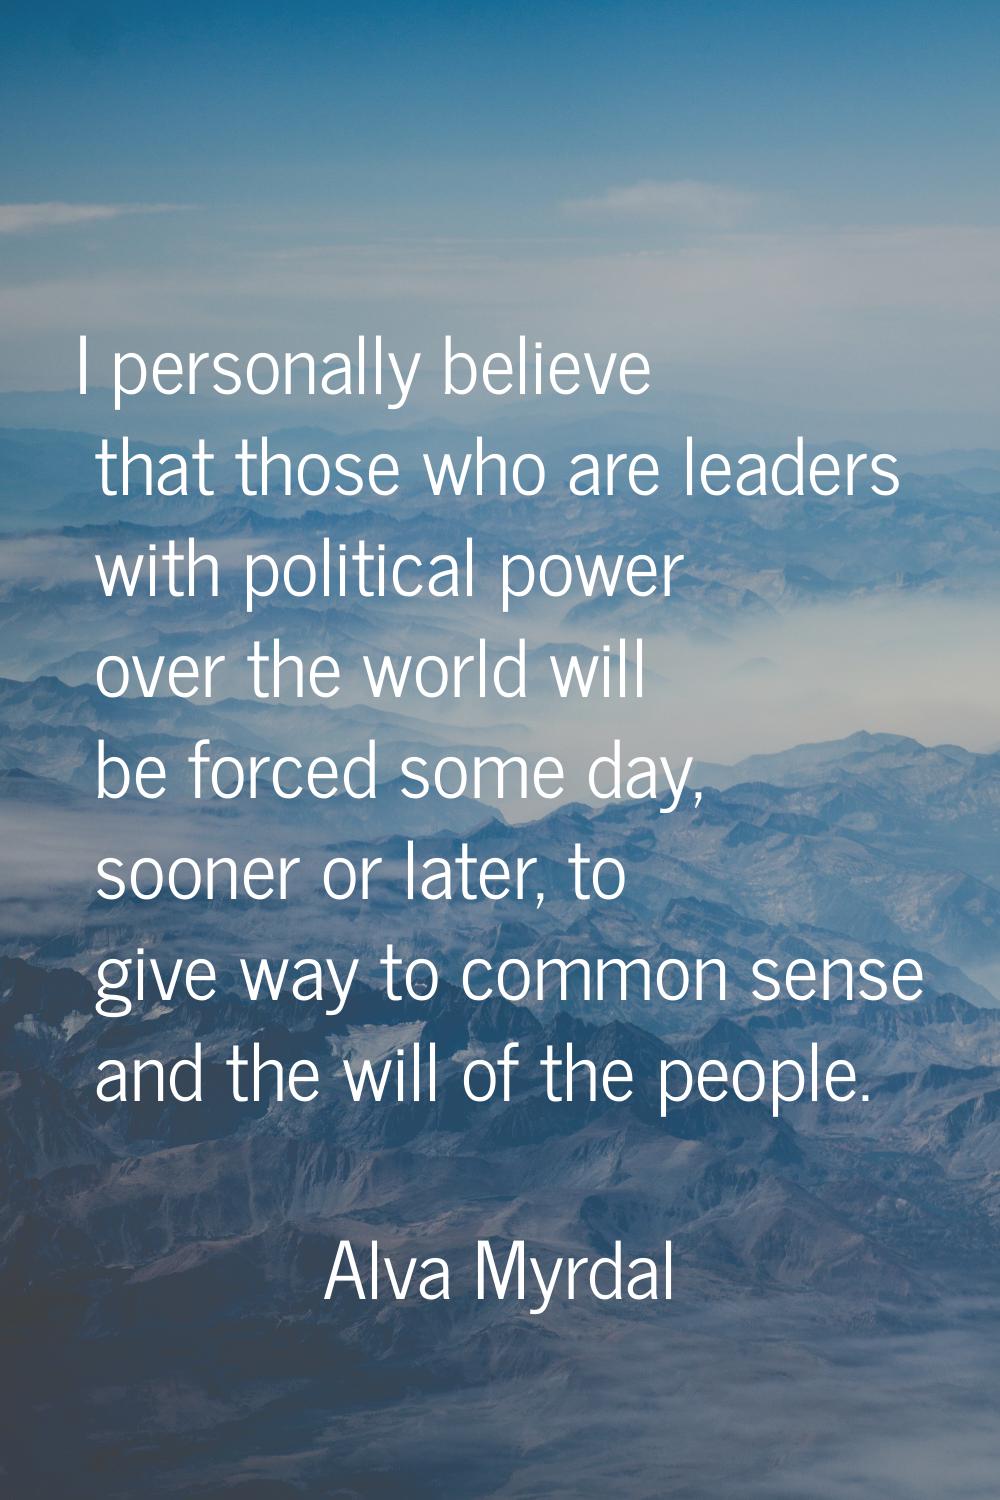 I personally believe that those who are leaders with political power over the world will be forced 